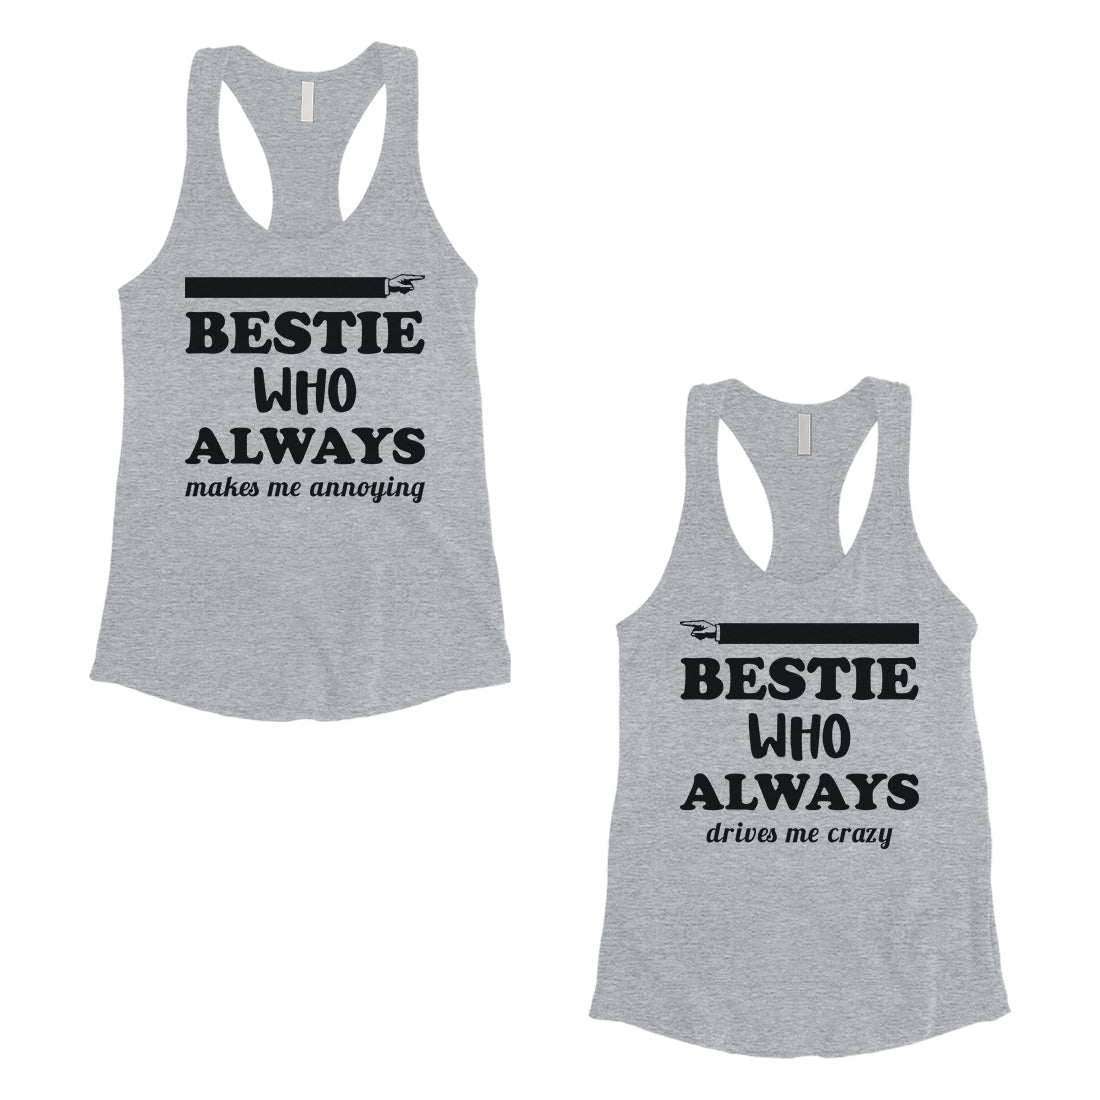 National Friendship Day: Treat your BFF with these special gift ideas -  masslive.com